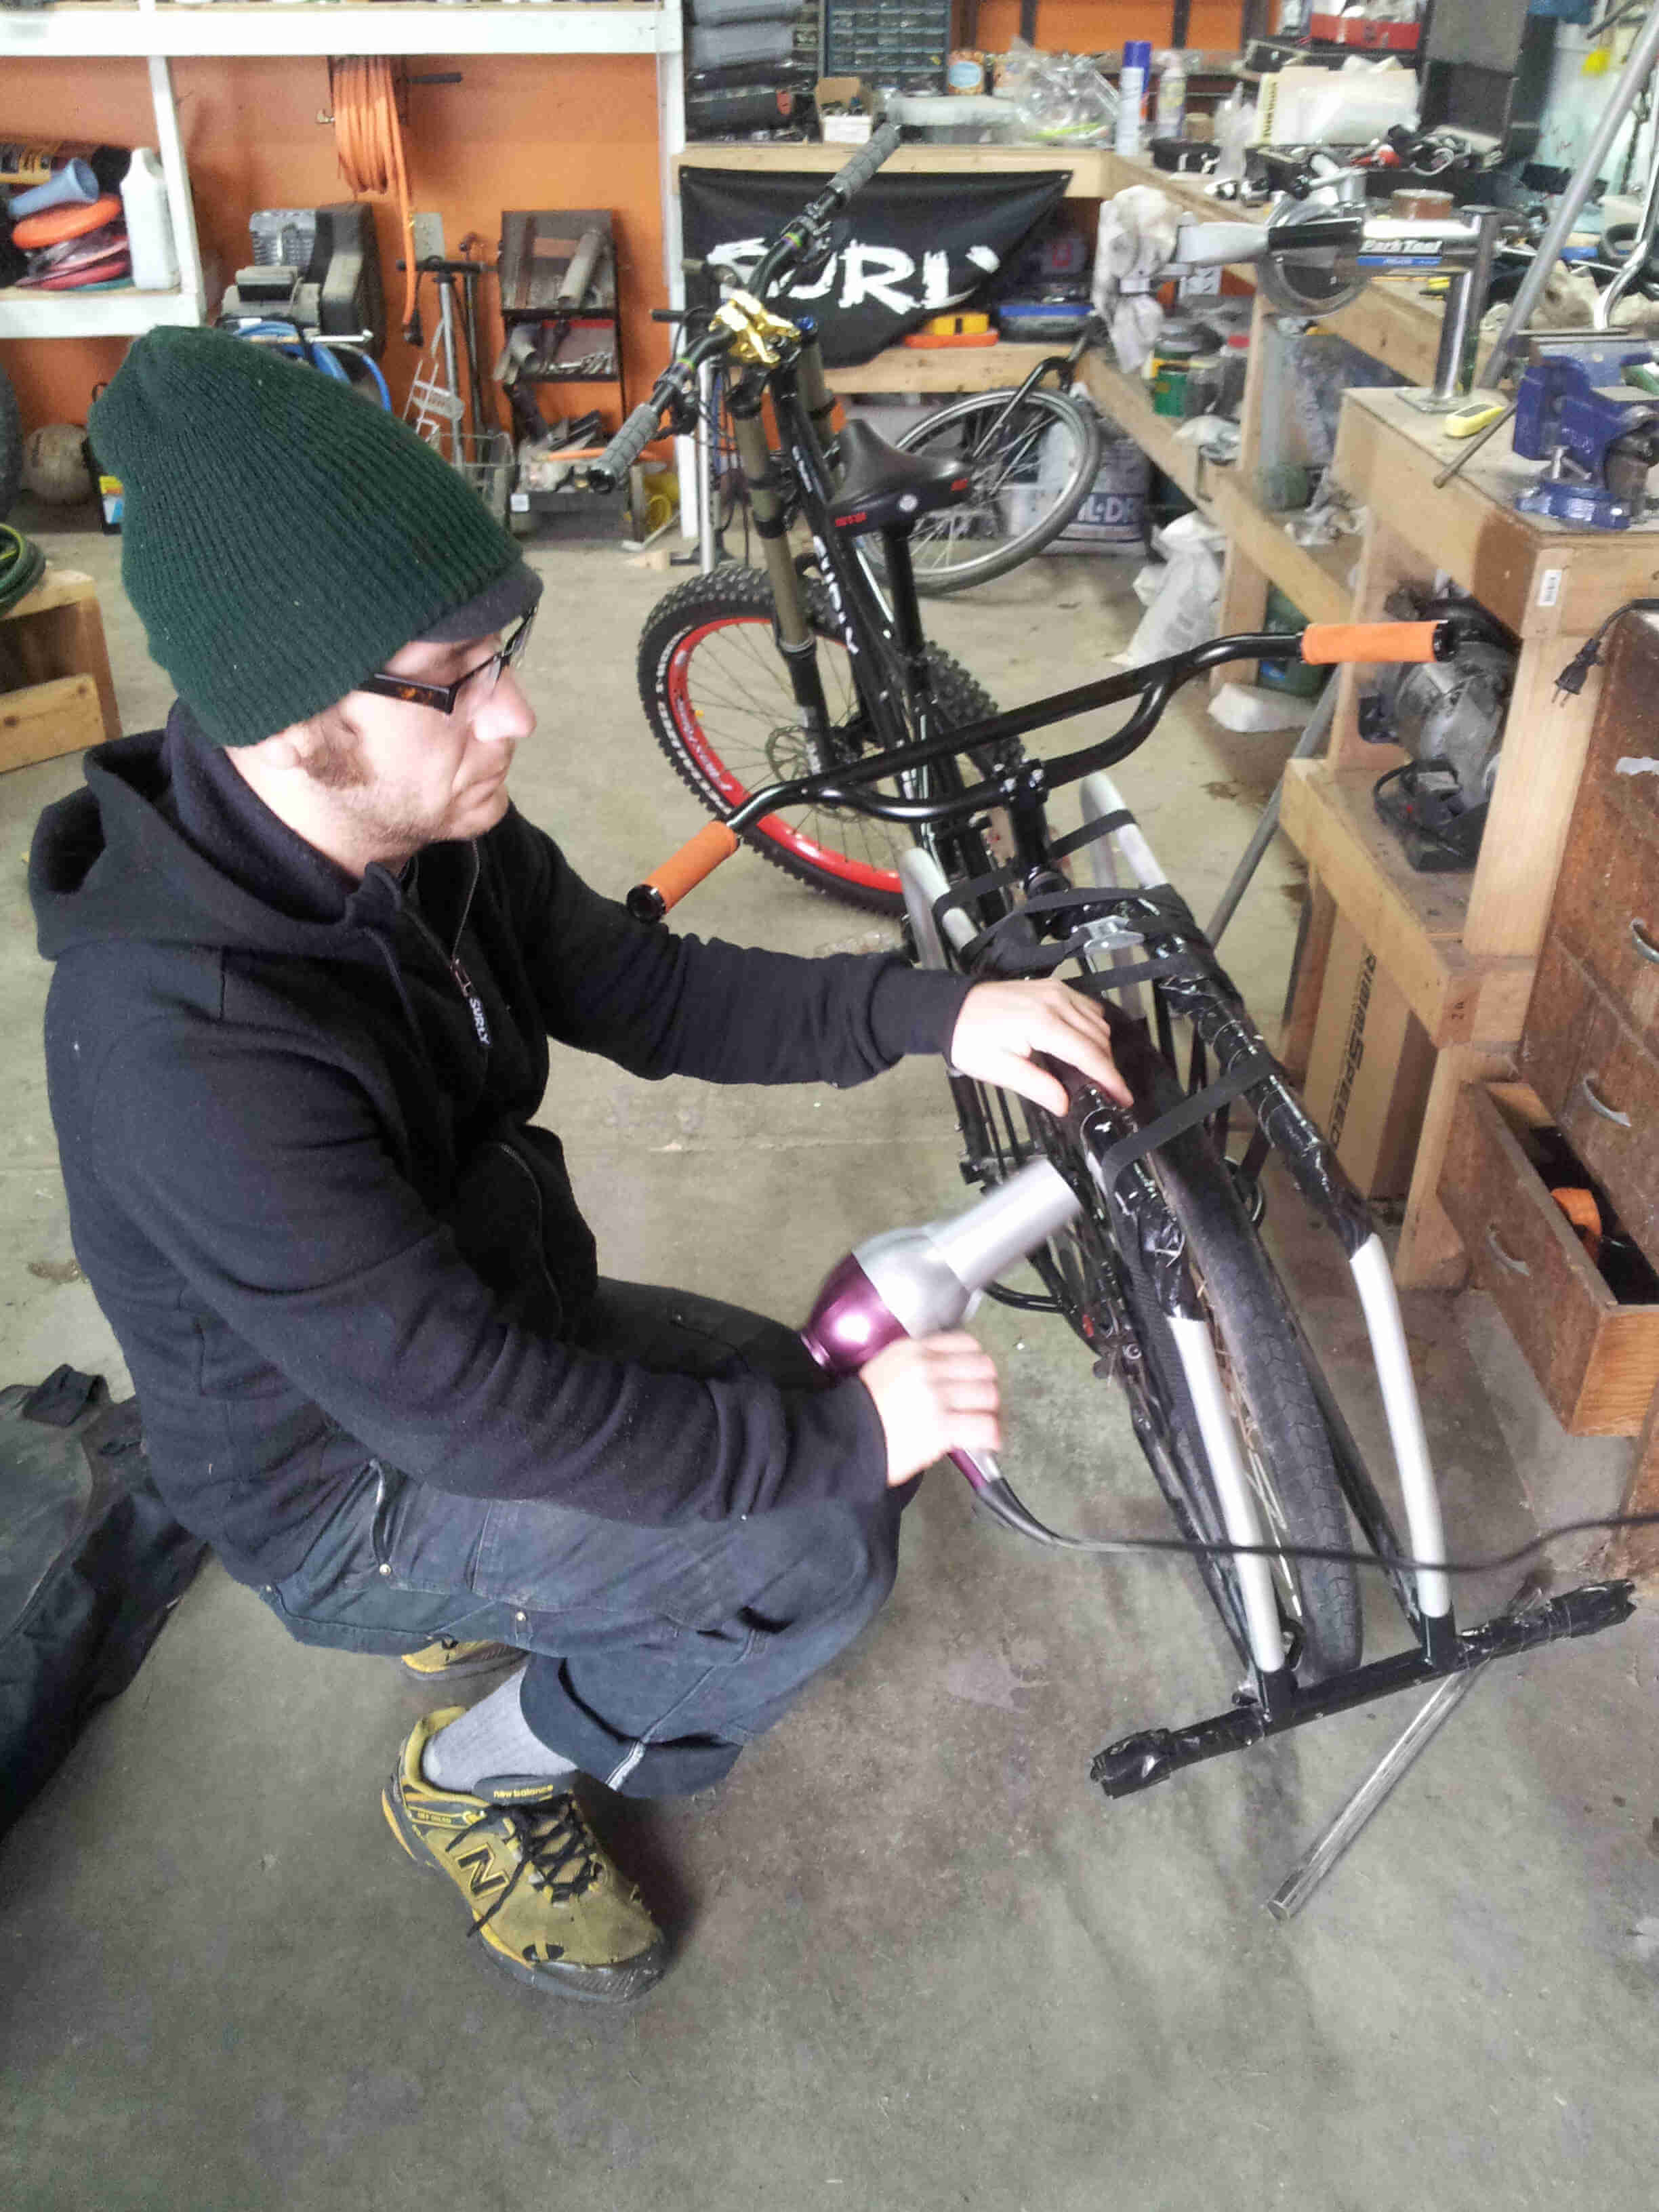 Rear view of a black Surly Big Dummy bike, with a person squatting down on the left side, inside of a workshop